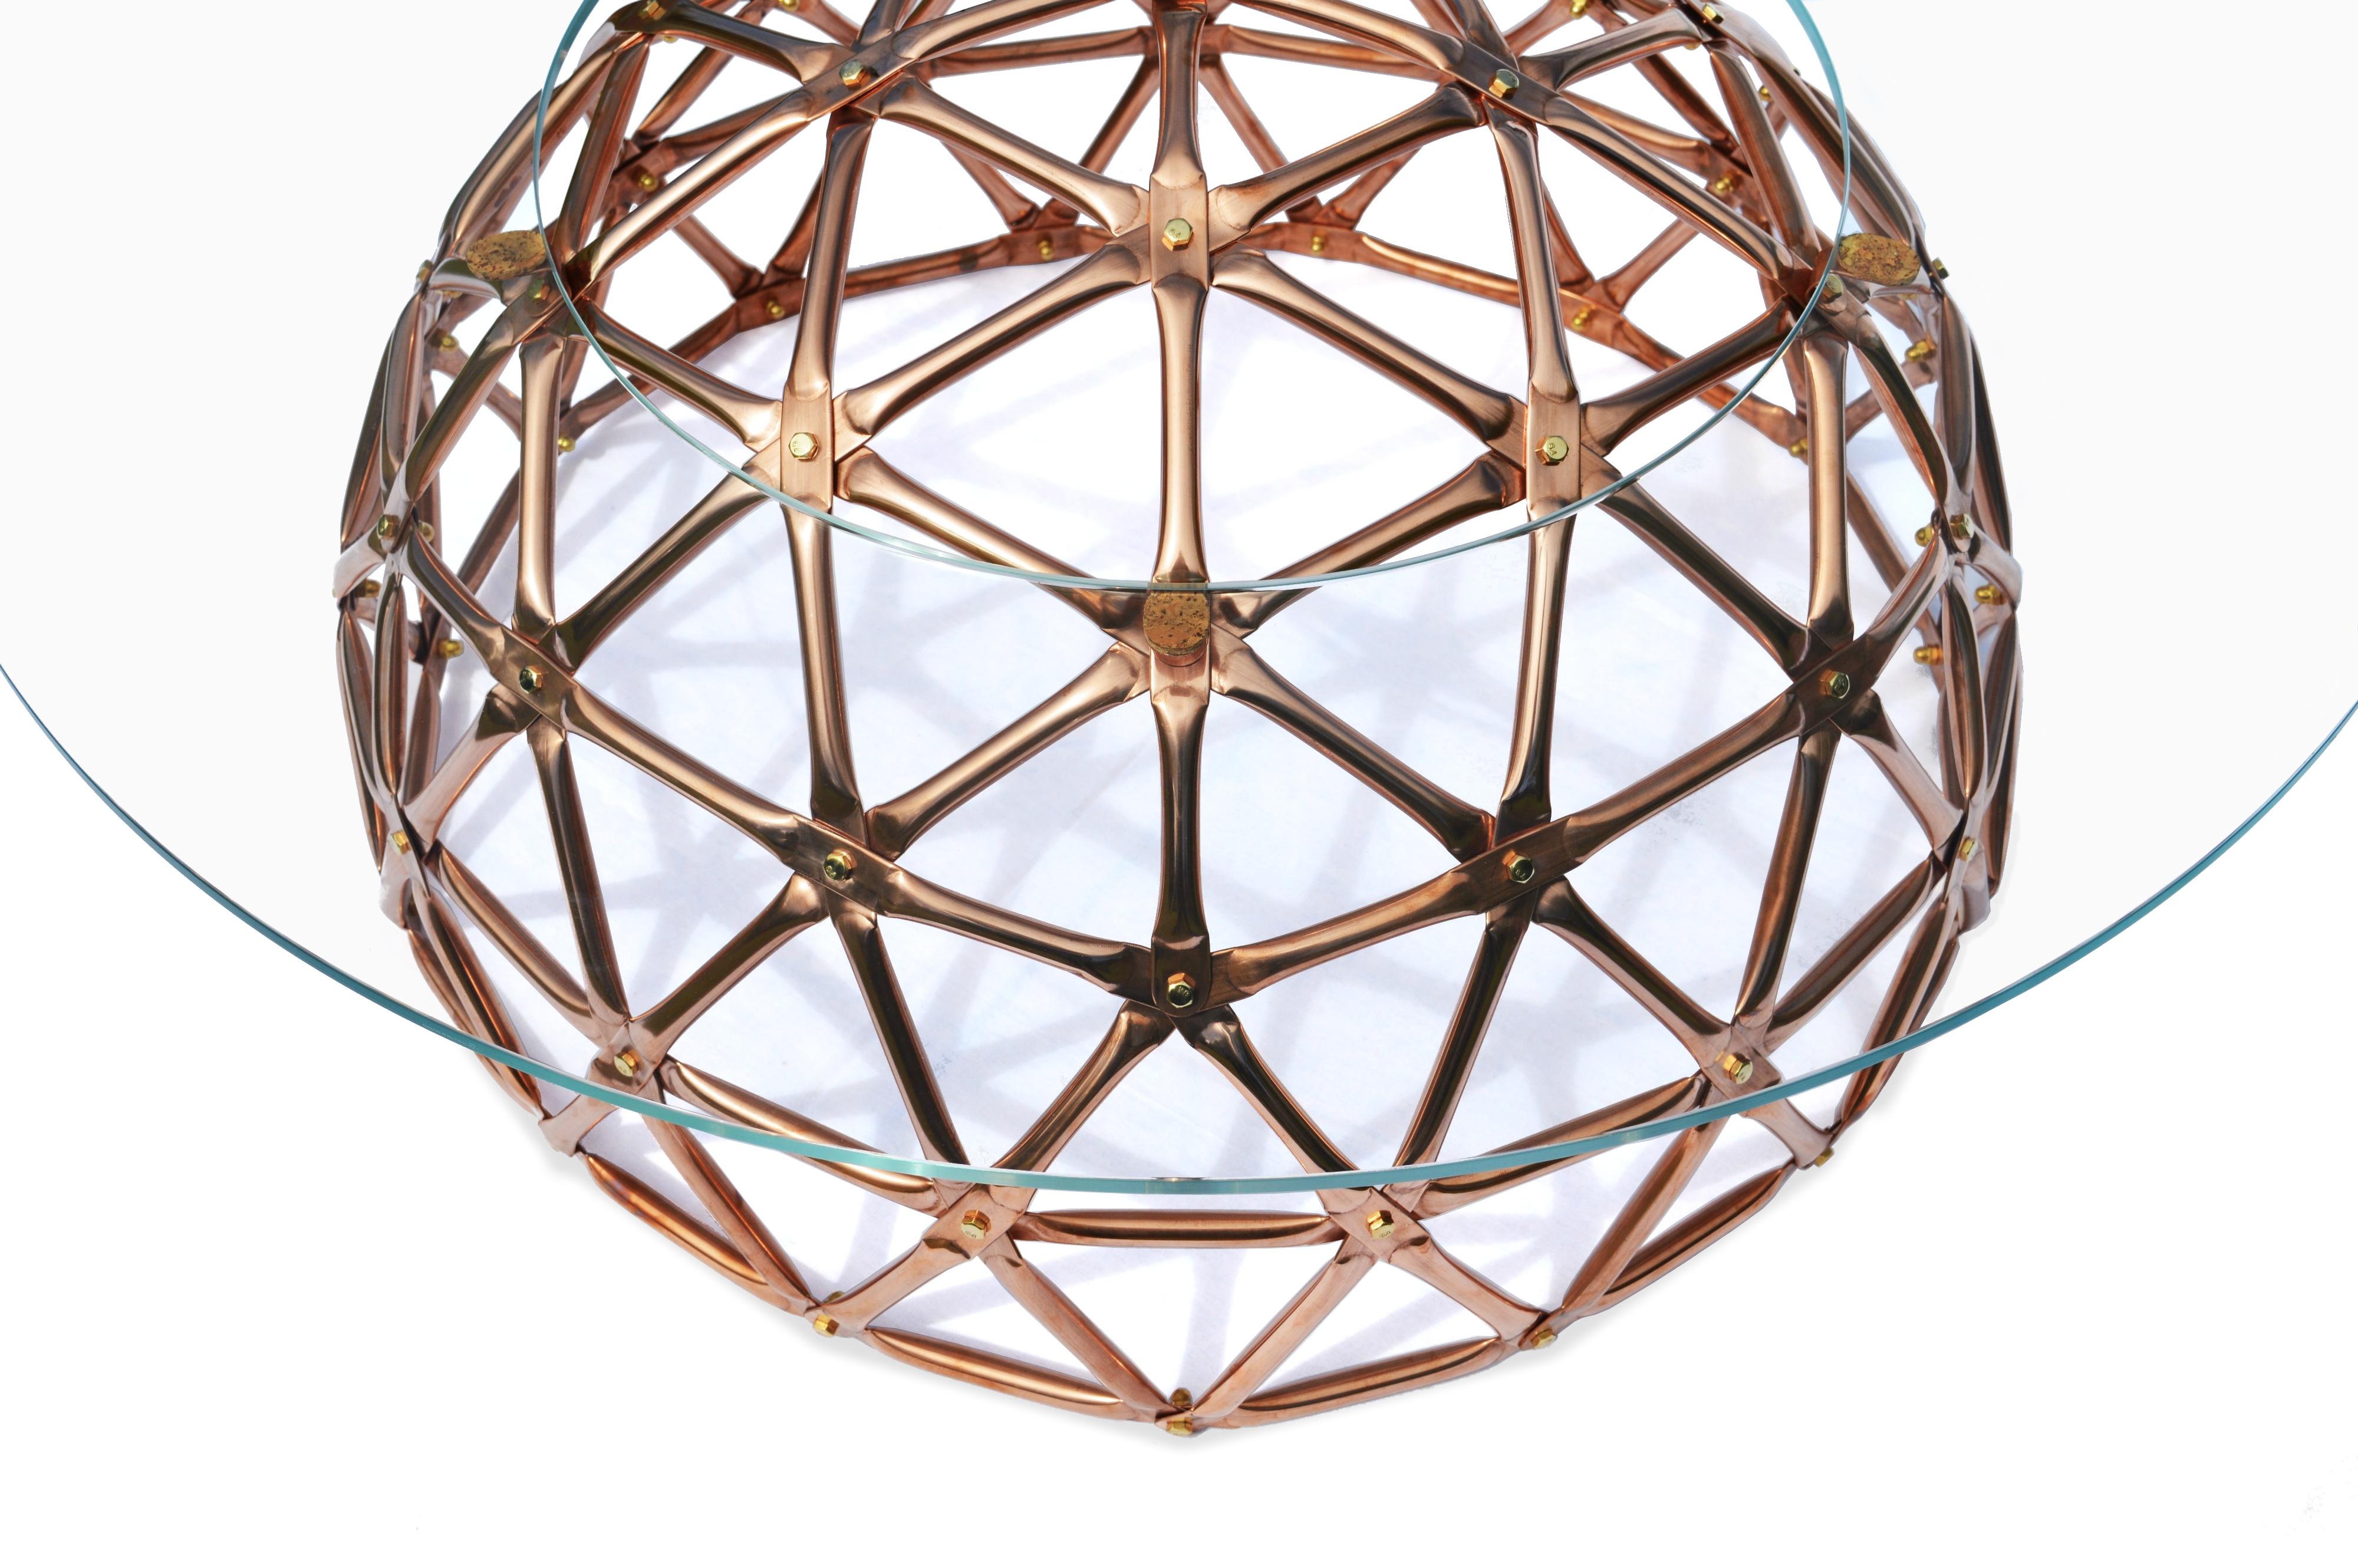 Inspired by the pioneering work of Buckminster fuller, the geodesic dome table brings the futuristic aesthetics and structural efficiency of geodesic architecture into furniture design. This unique center table provides a striking visual statement